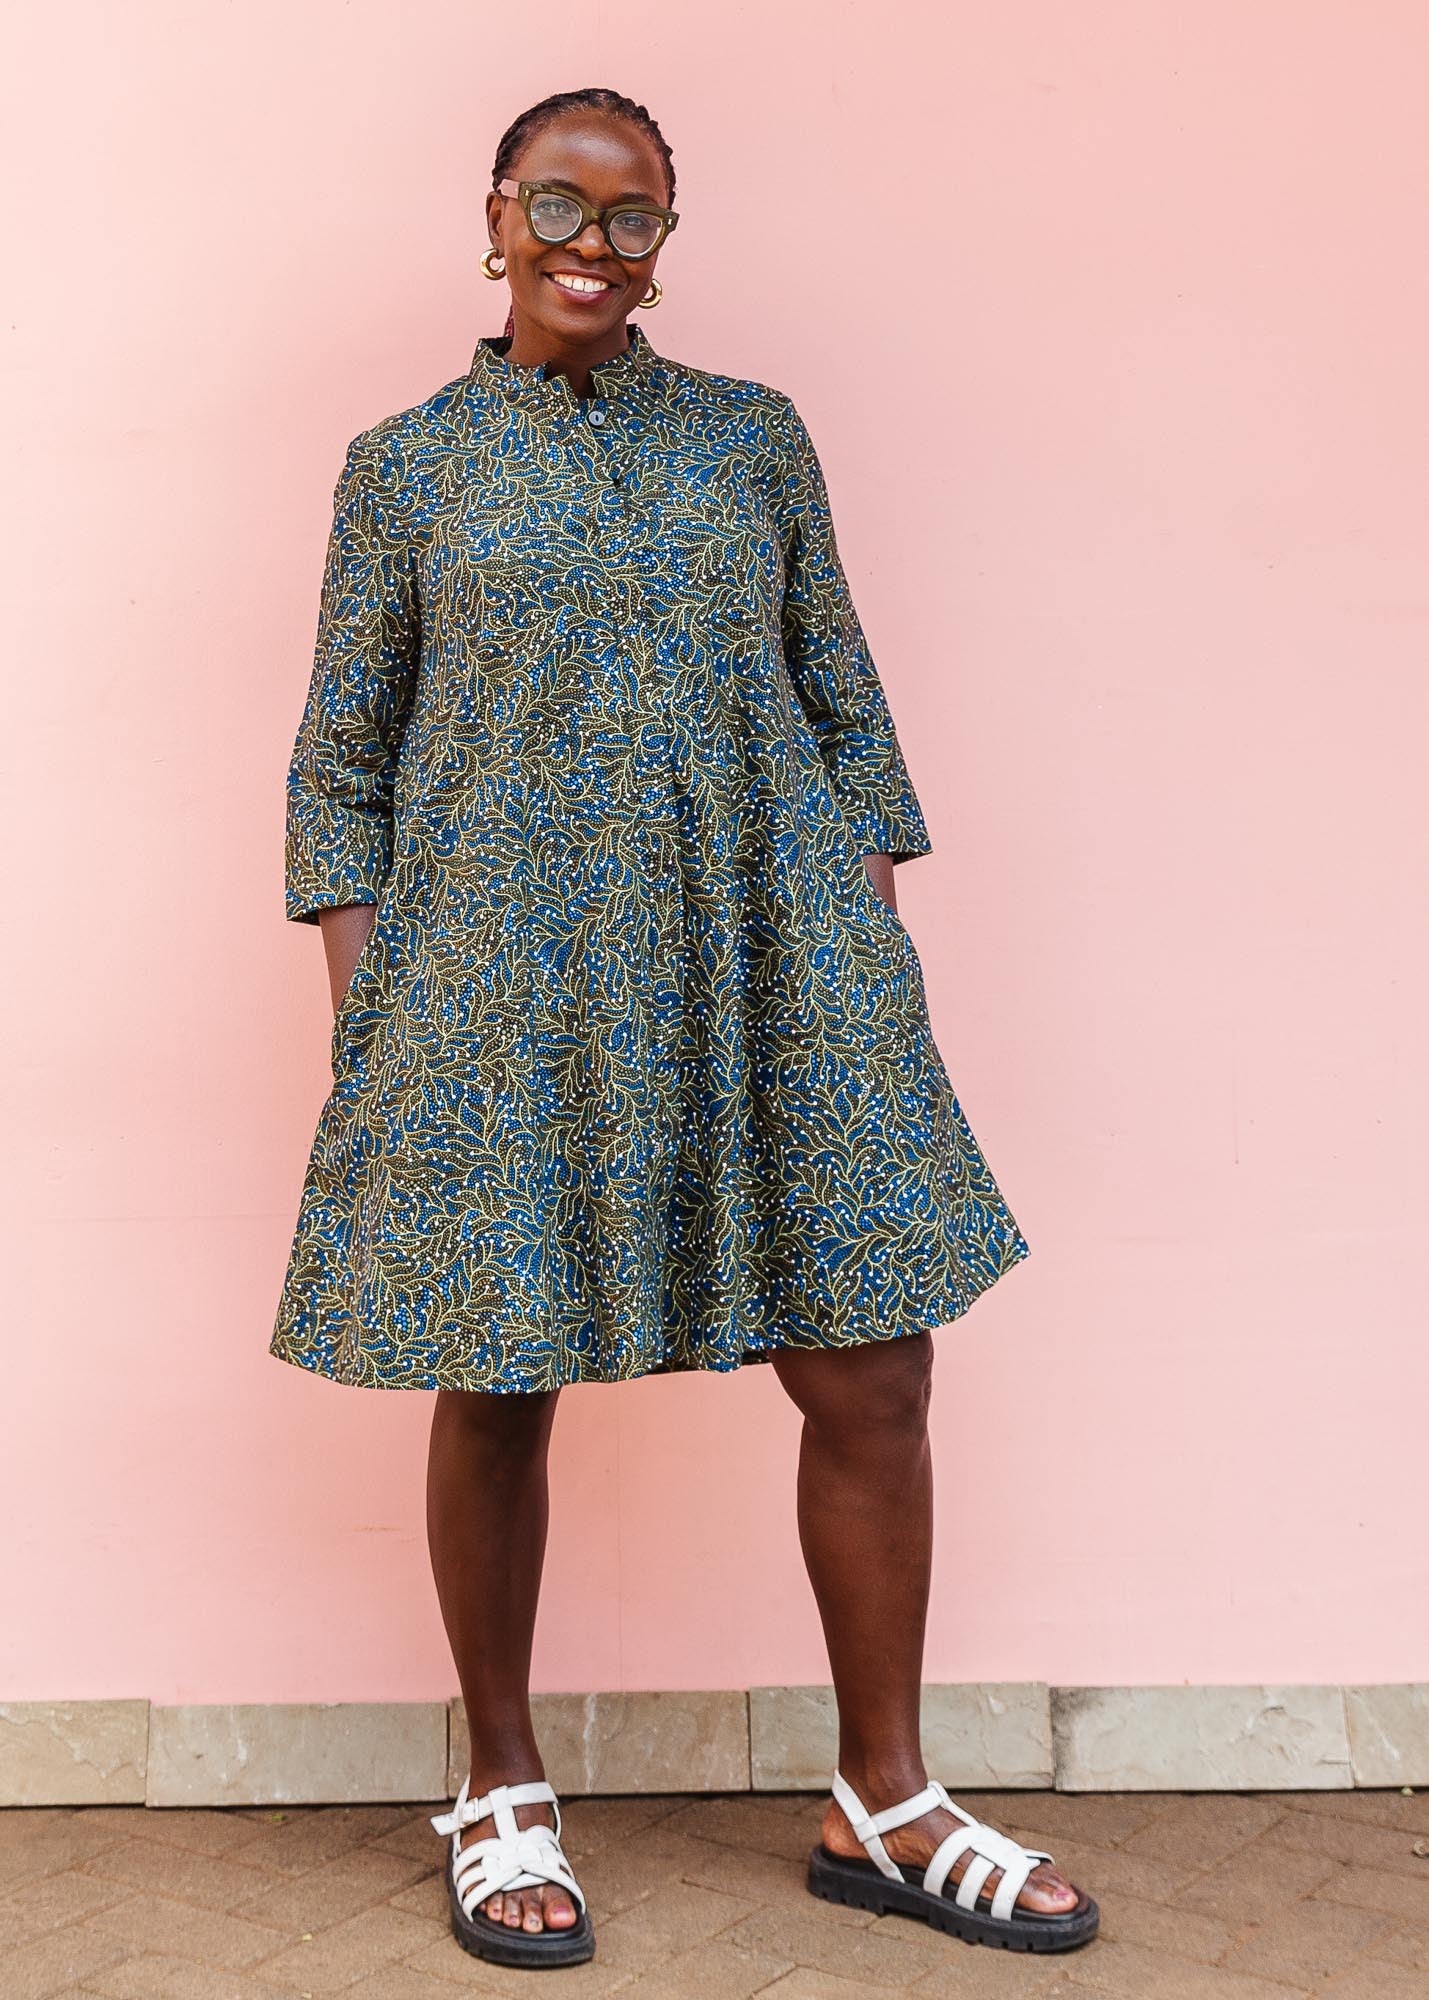 The model is wearing blue, white, black , yellow and green vine print dress